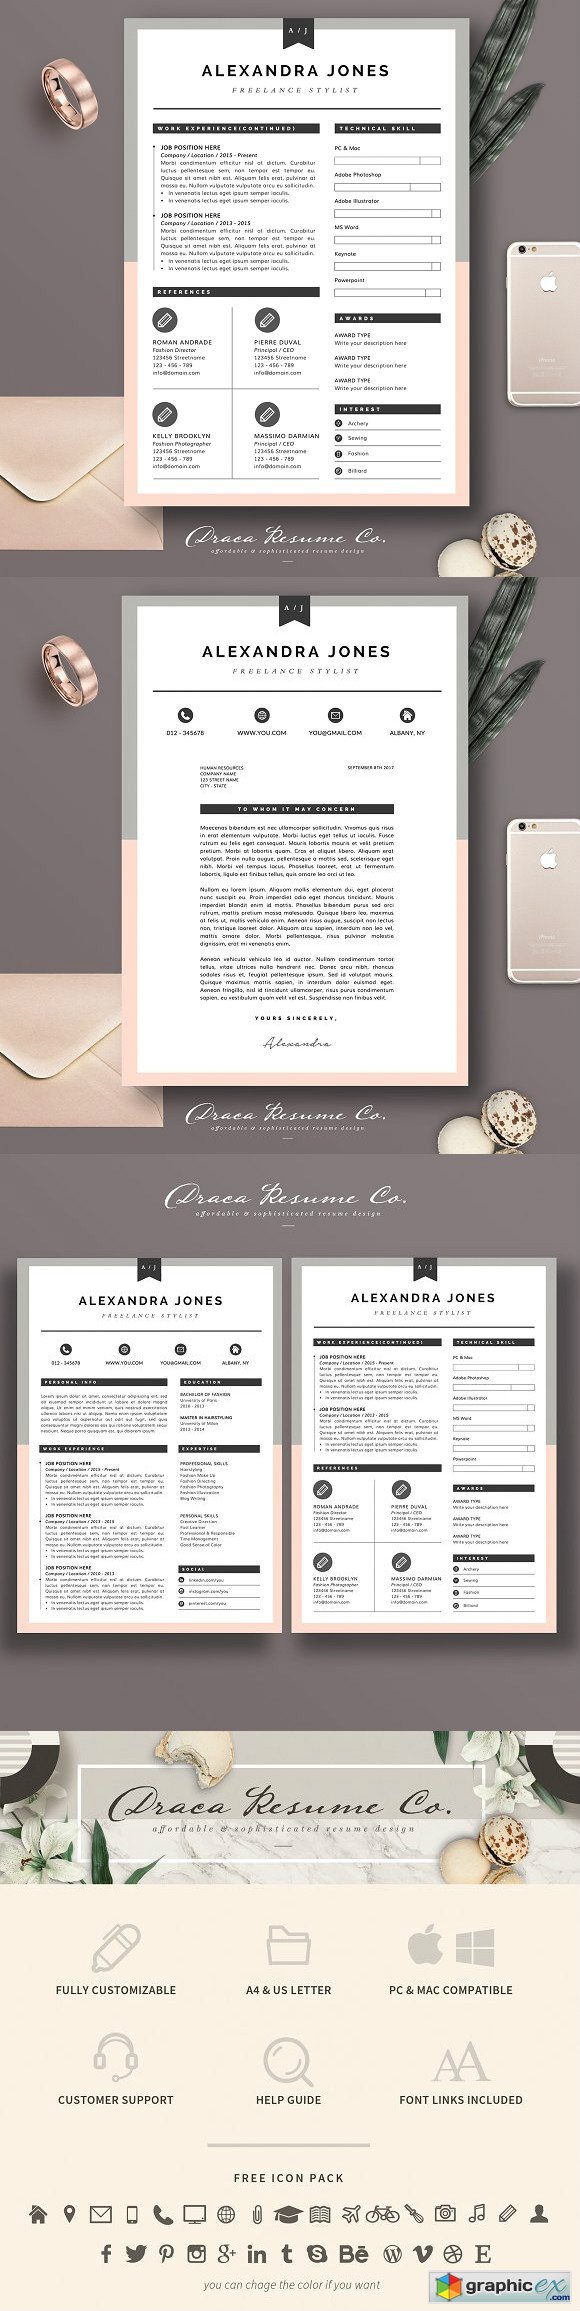 Resume Template 3 page pack AJ